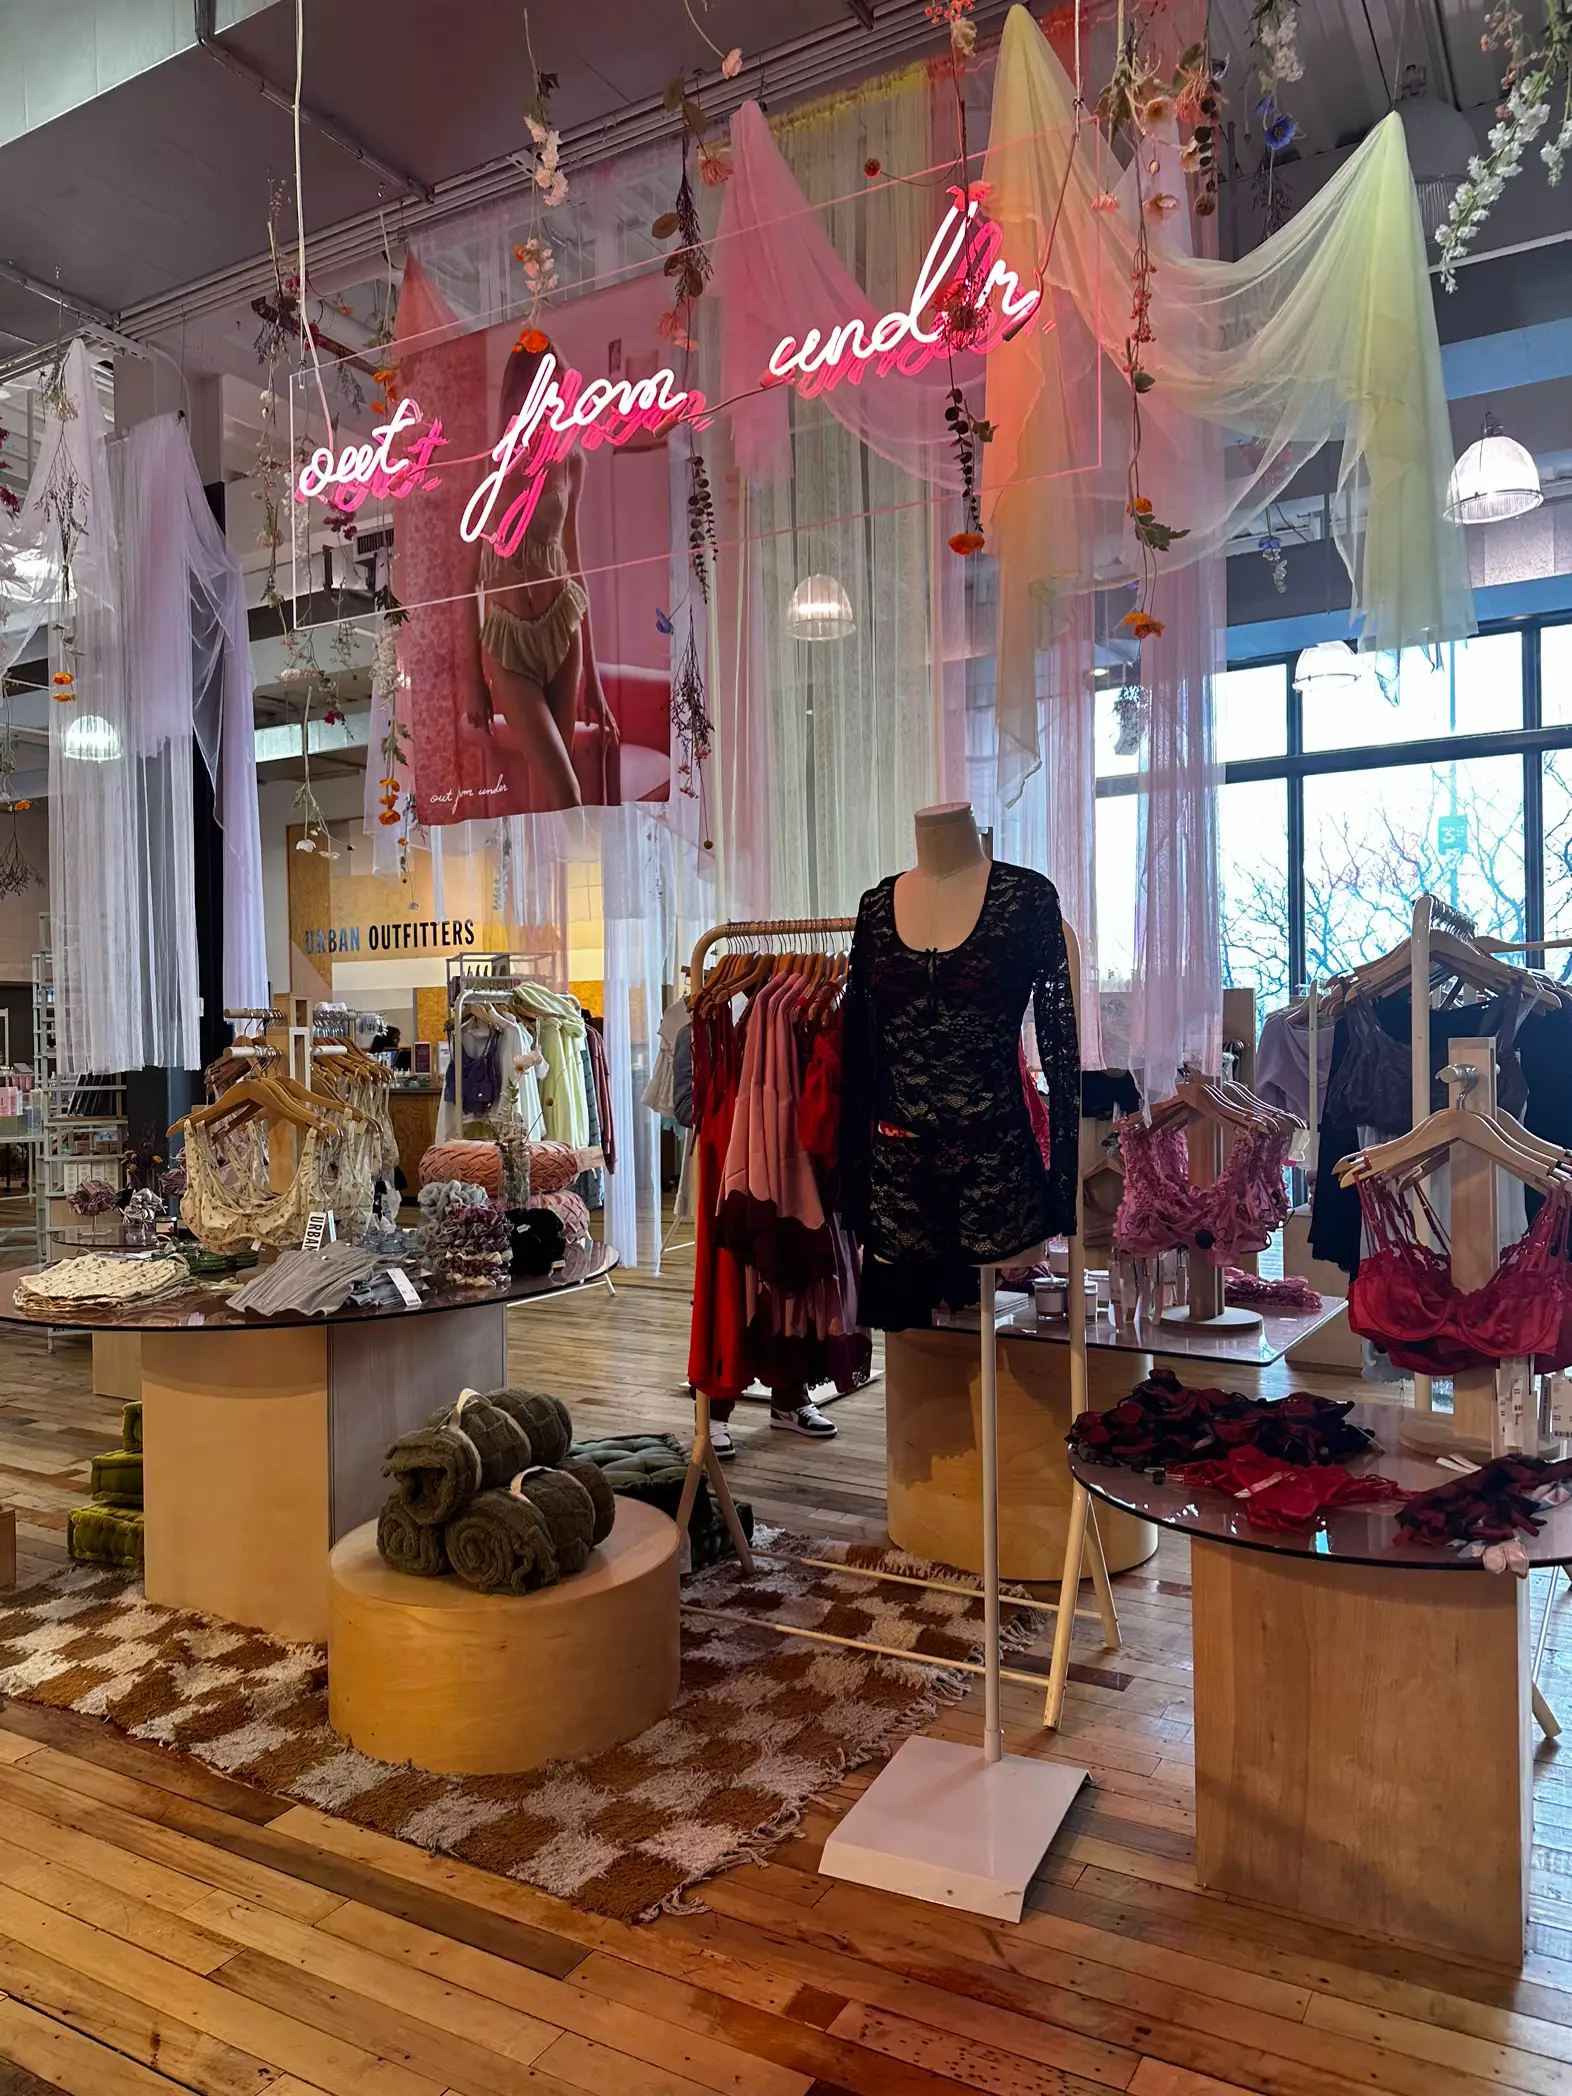 Shopping as an experience: the art of visual merchandising at Brandy  Melville – green is the new black